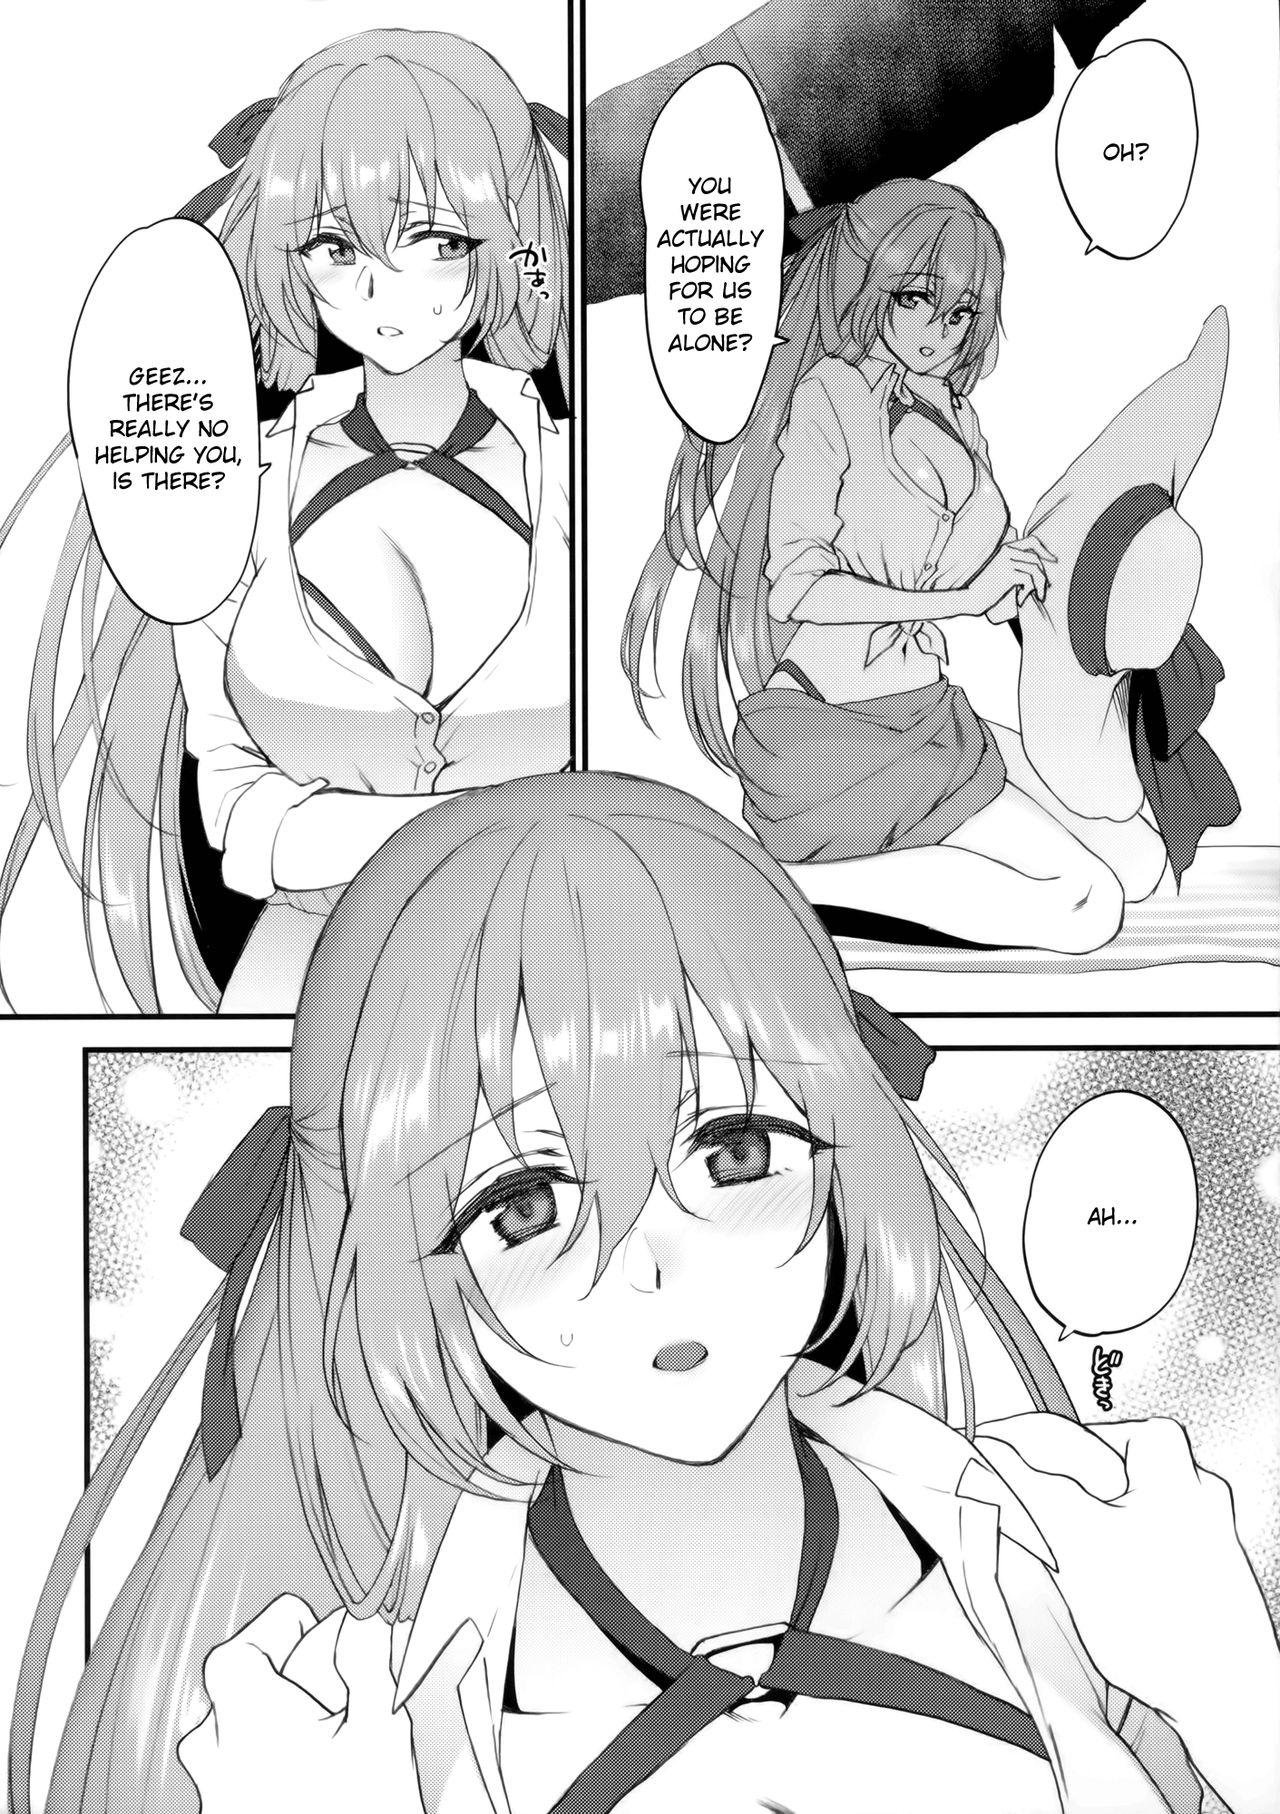 Mulher Summer Escape - Girls frontline Chileno - Page 5